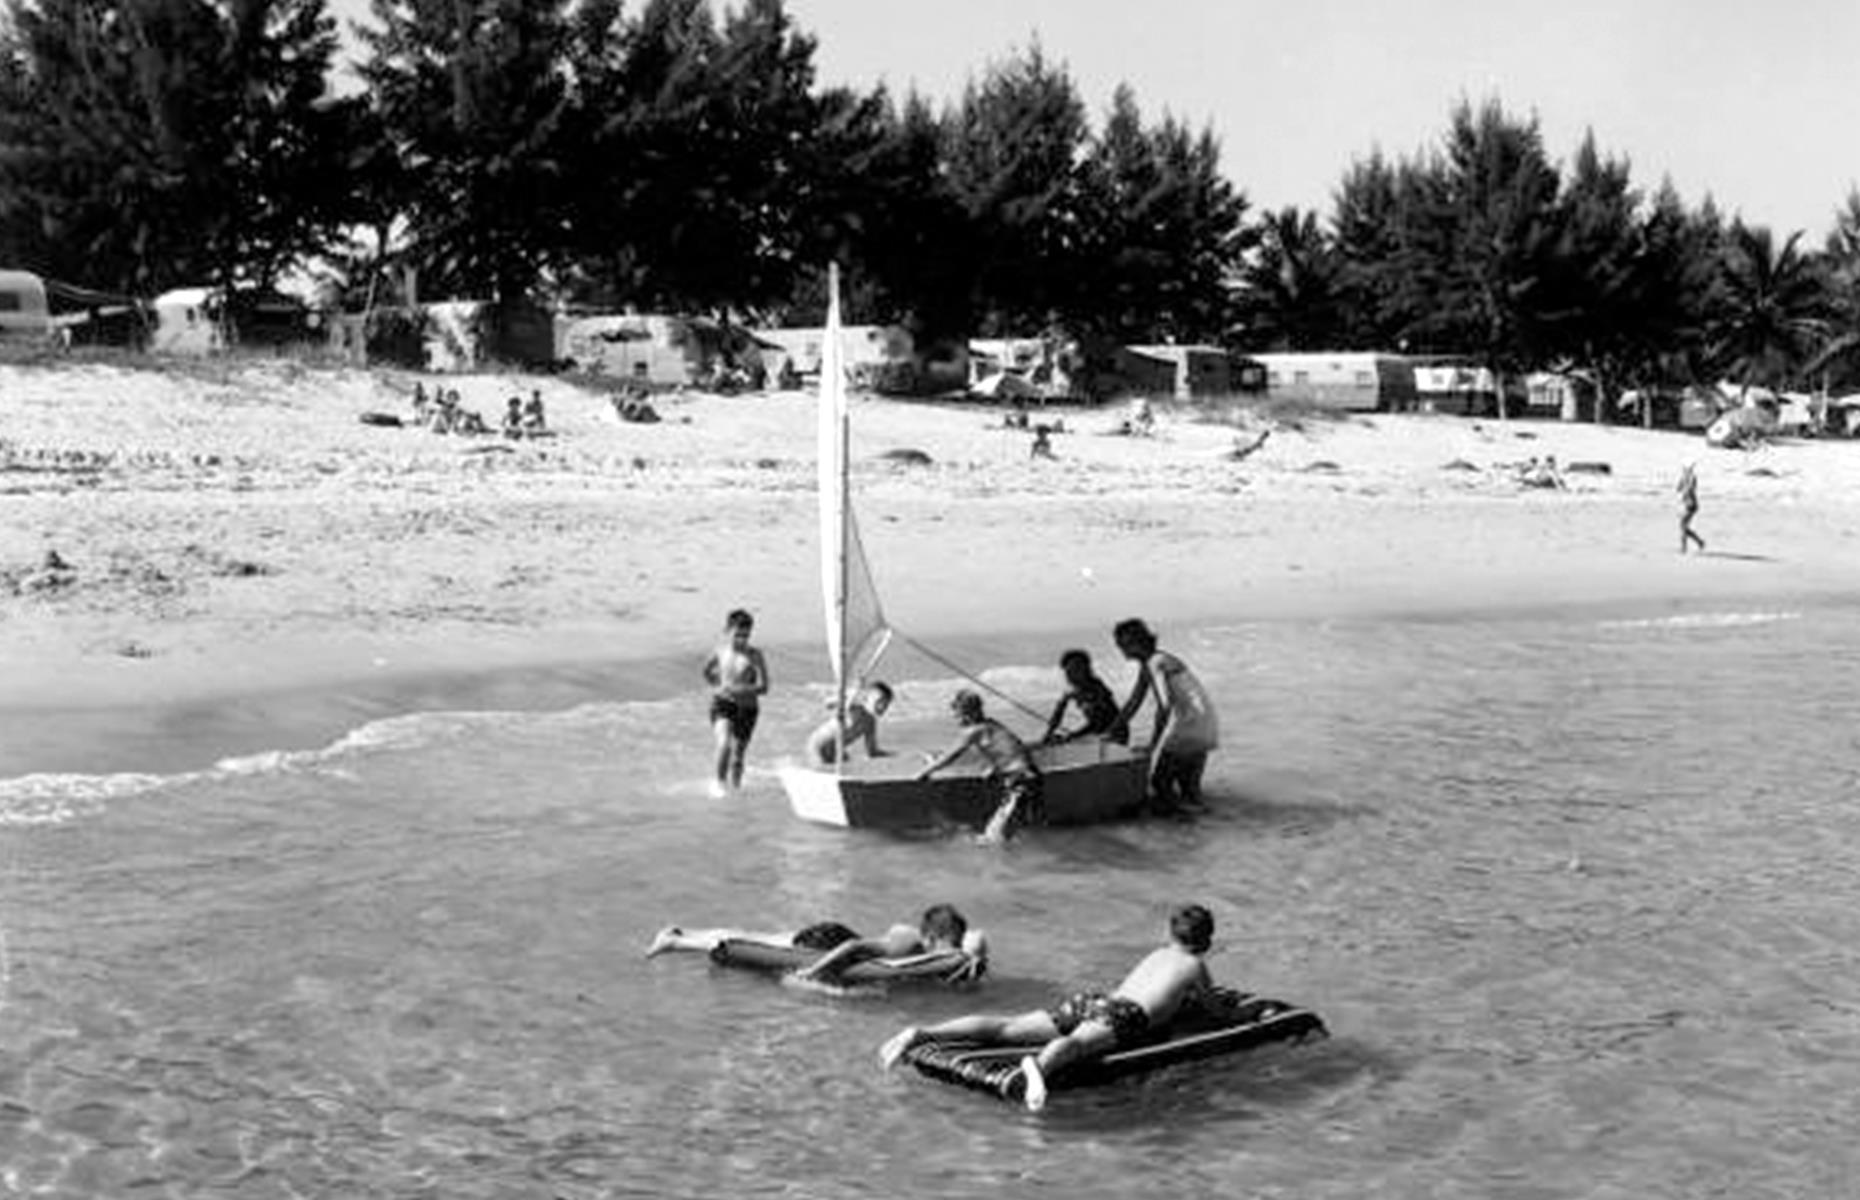 Plenty of Americans chose to pair a classic beach vacation with a trip in their trailer or motorhome. Photographed in 1953, a row of RVs line this beach in Hollywood, southeastern Florida, where families relax on the sand and kids float on inflatables in the Atlantic Ocean.